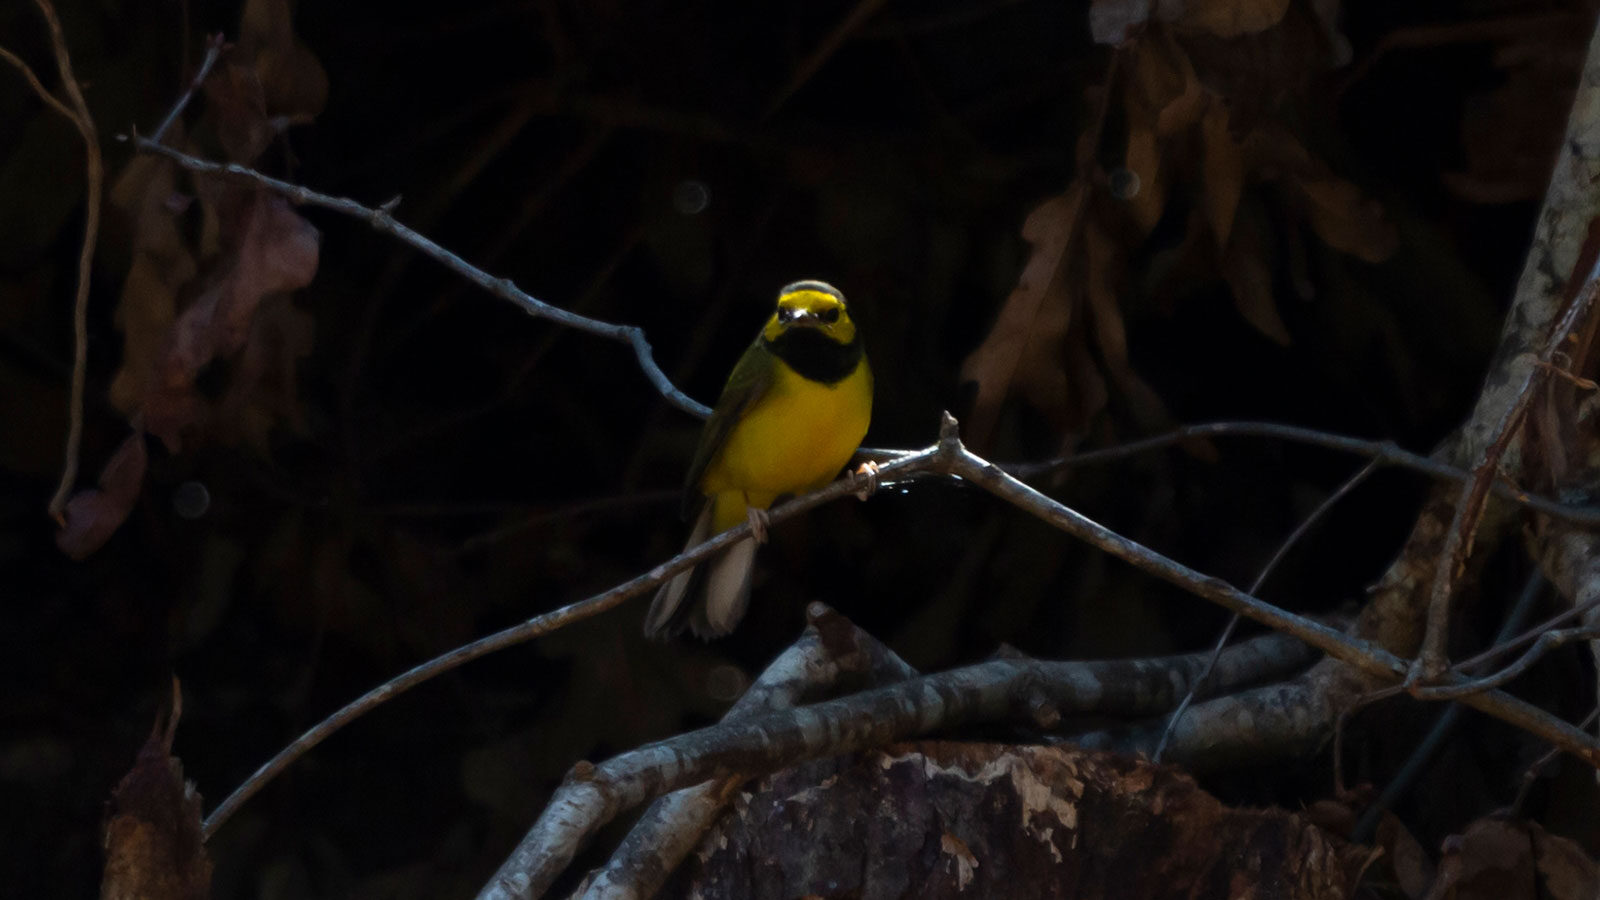 Hooded warbler looking out from its perch on a limb